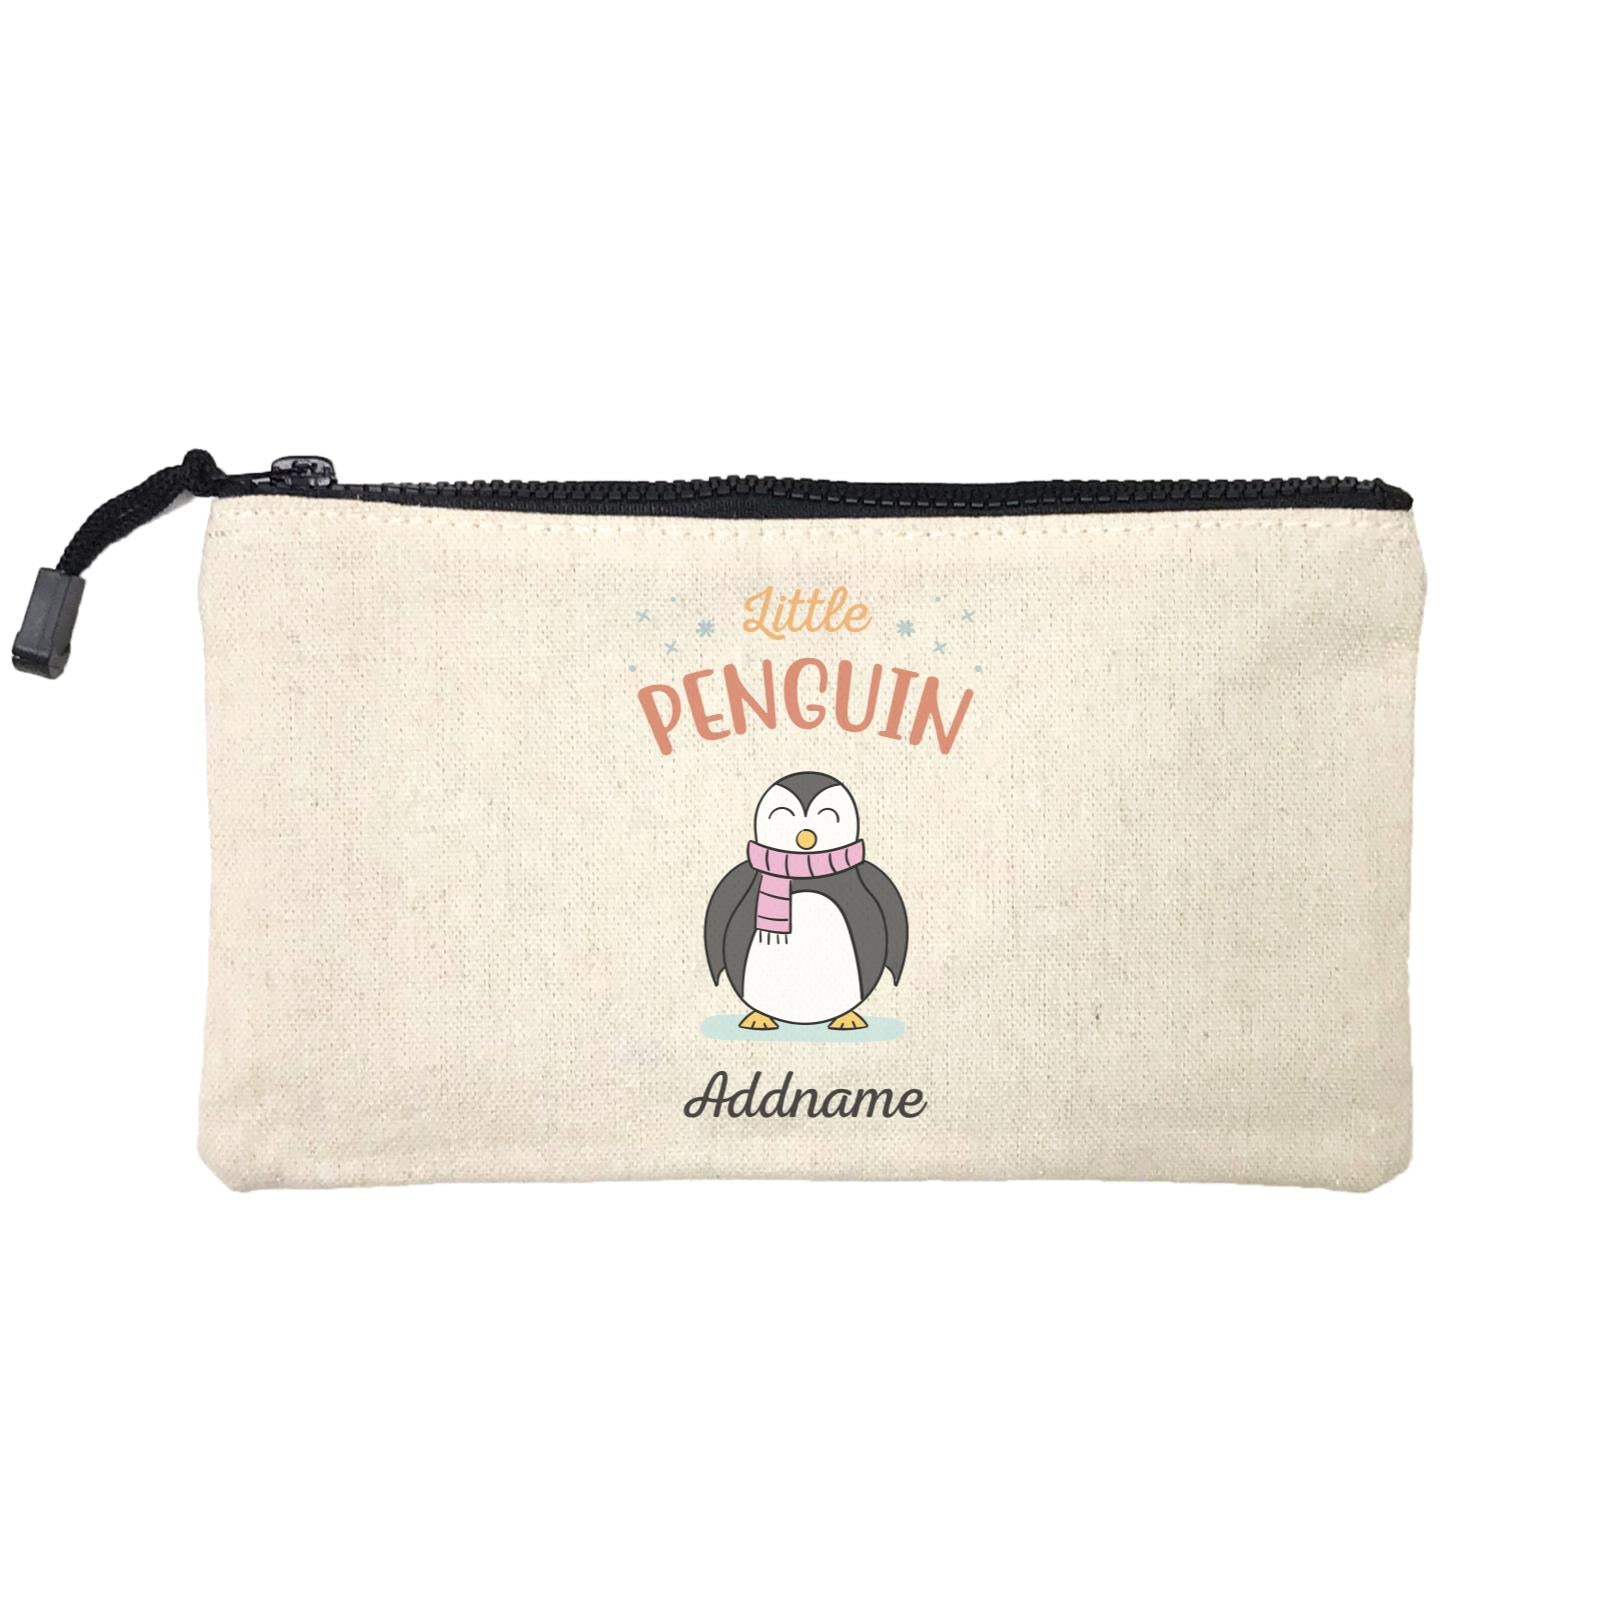 Penguin Family Little Penguin With Scarf Addname Mini Accessories Stationery Pouch